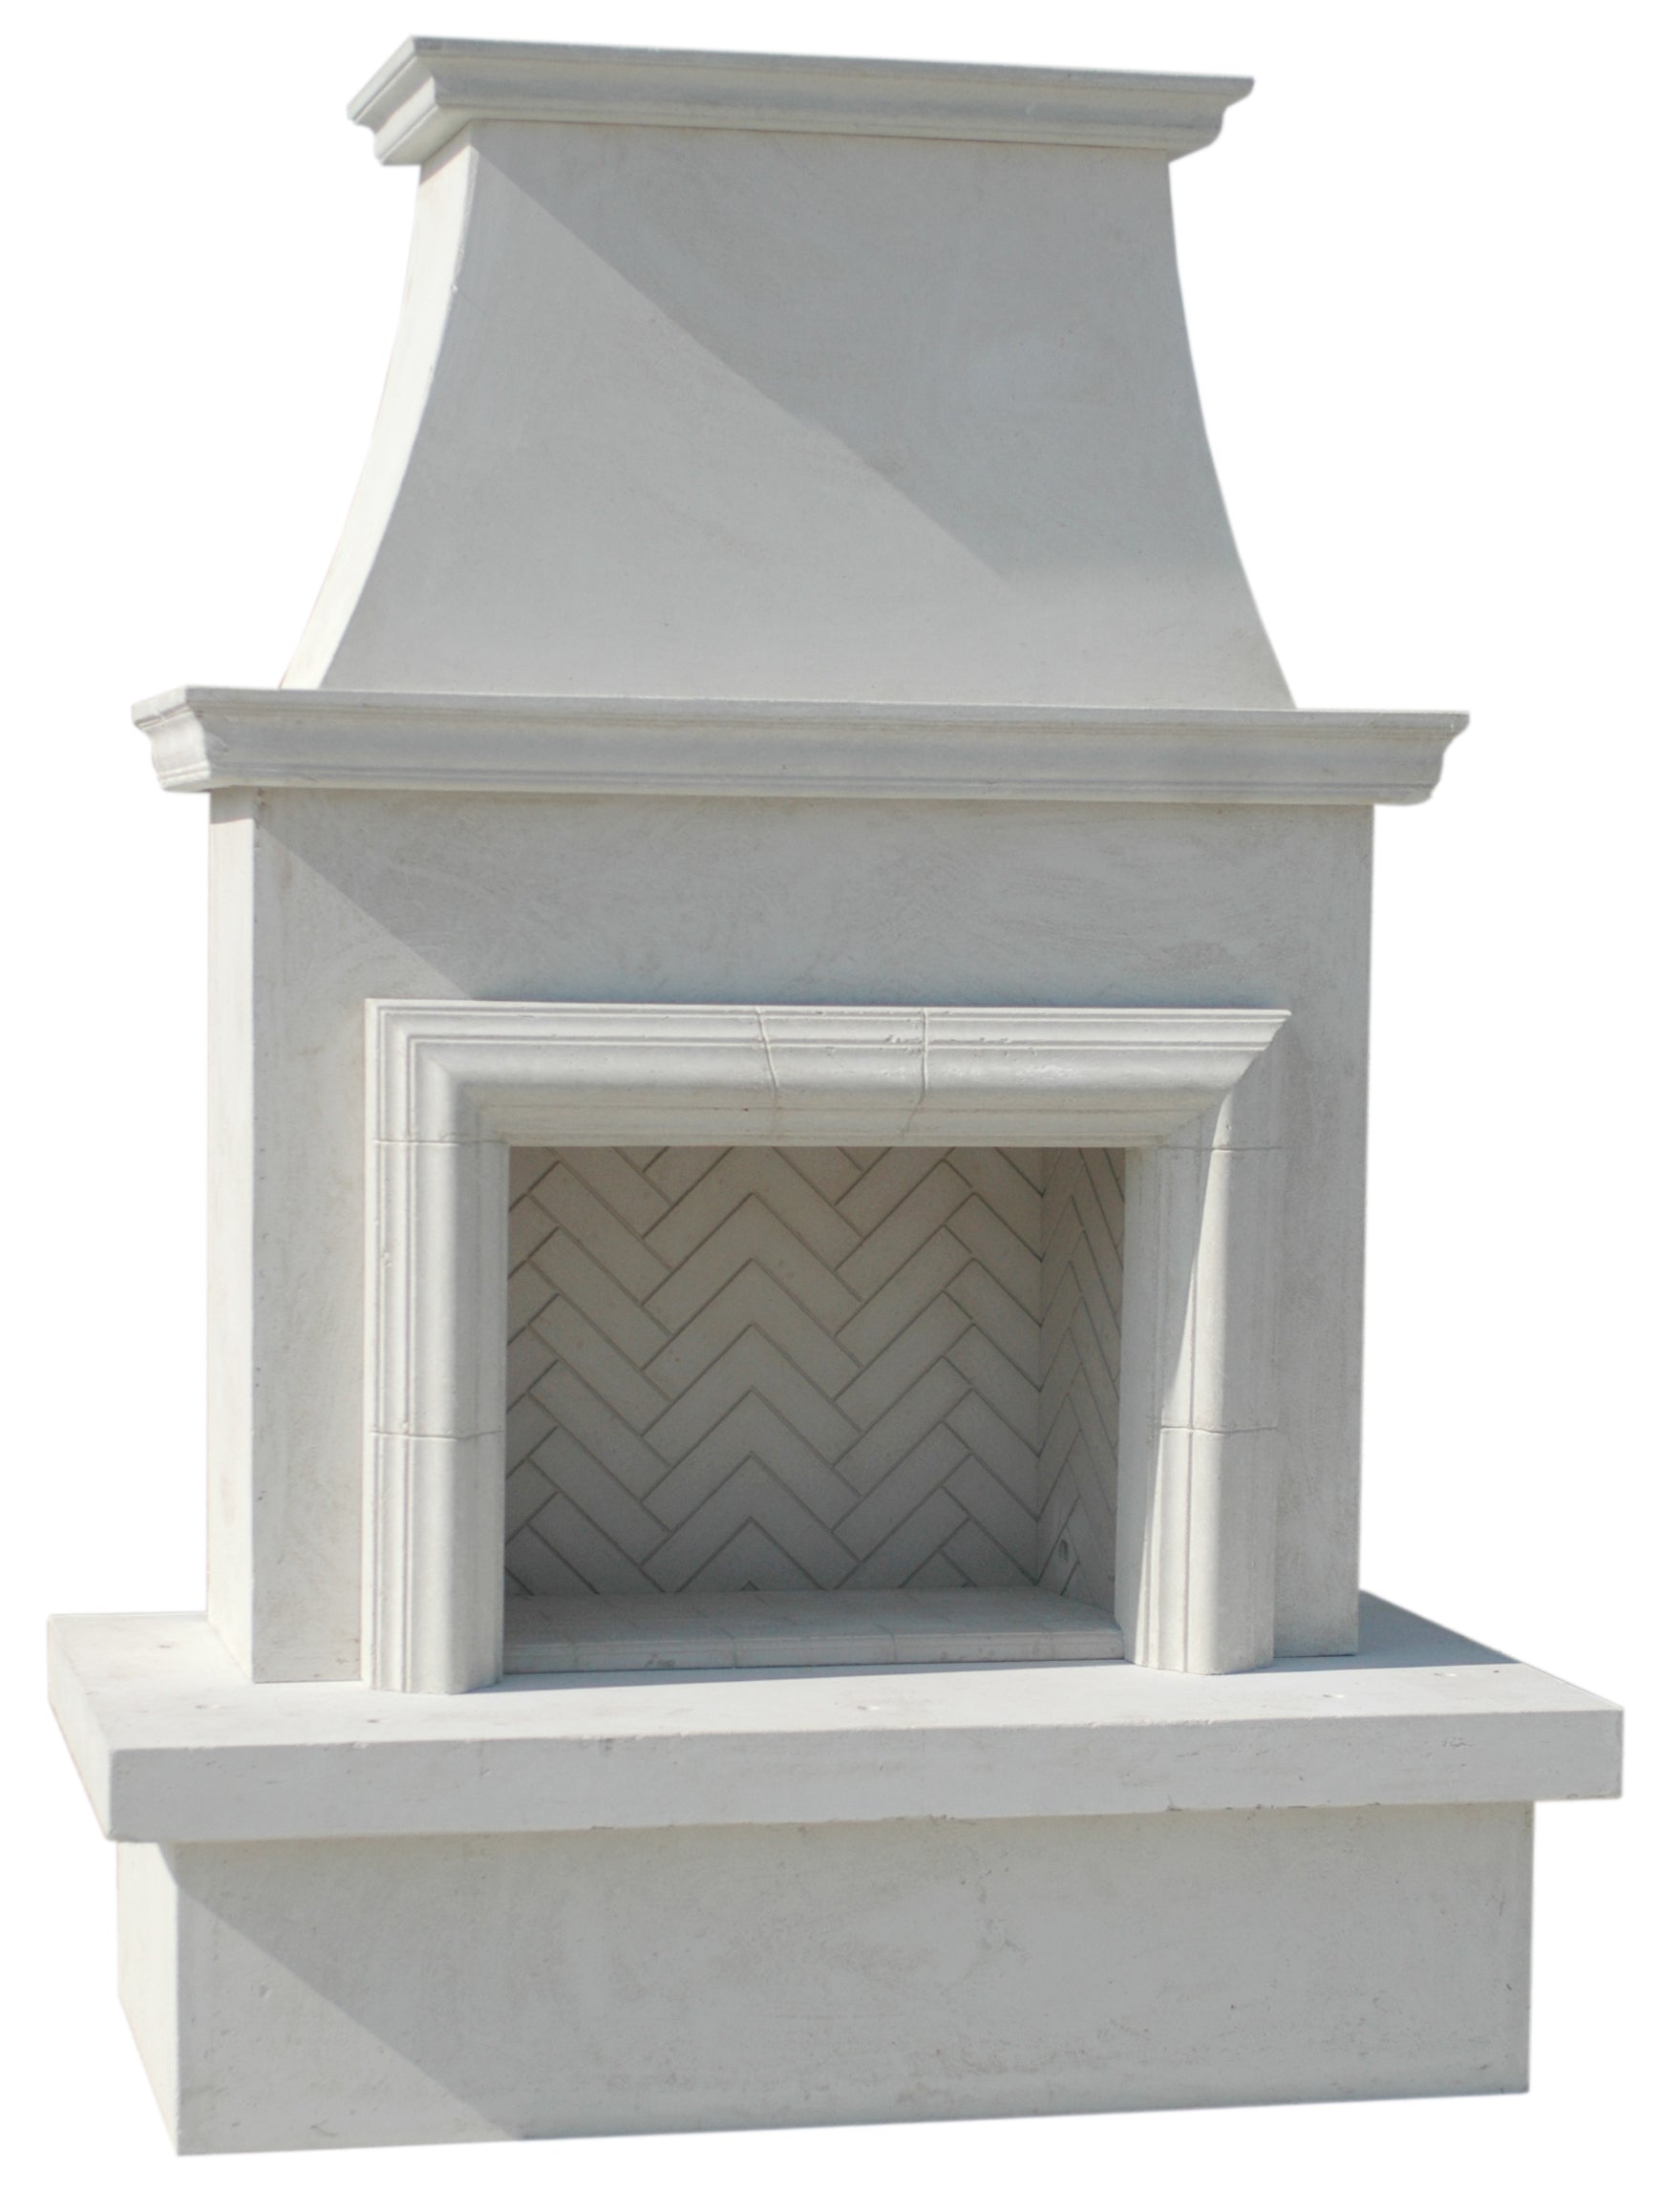 Contractor's Model with Moulding Outdoor Gas Fireplace by American Fyre Designs